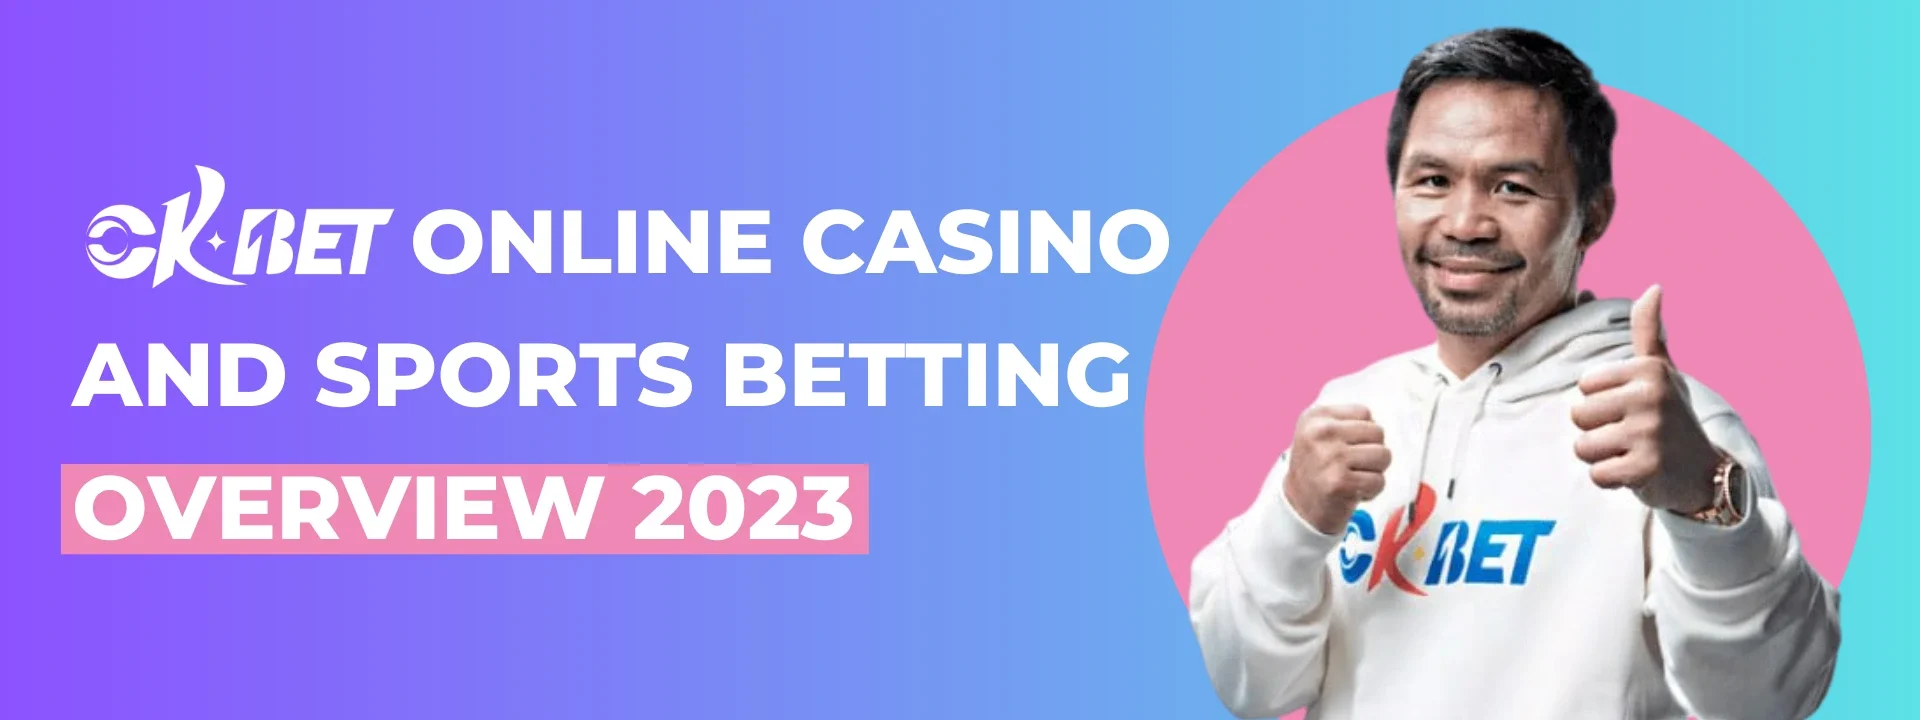 OKBET Online Casino and Sports Betting Overview 2023